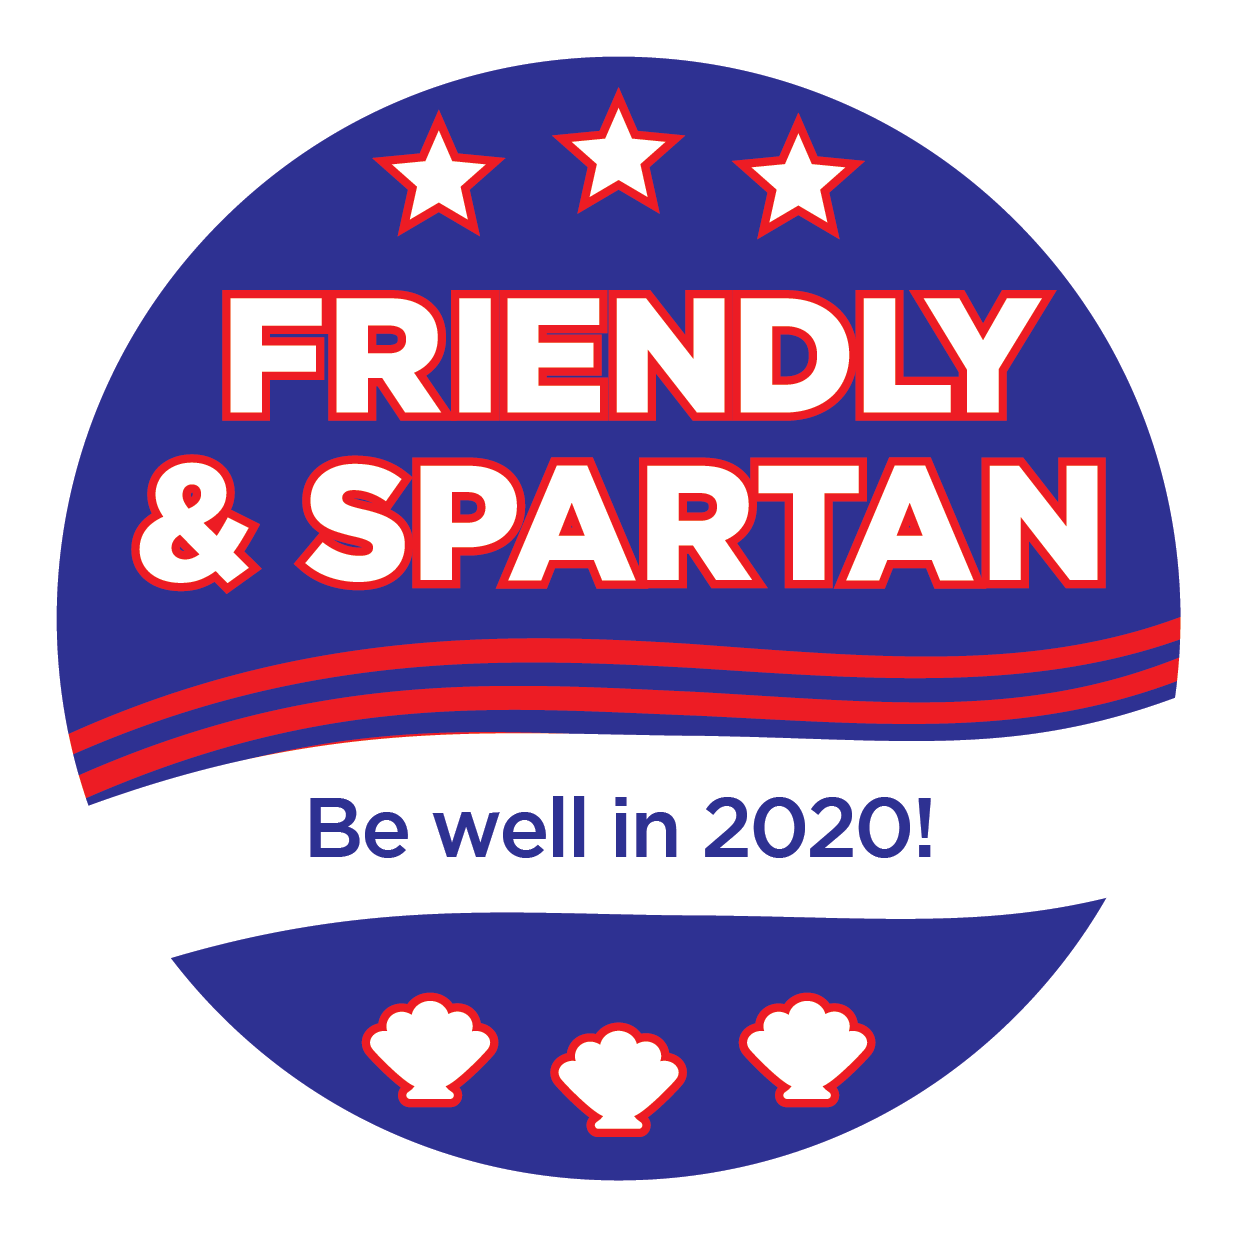 Friendly & Spartan Be well in 2020